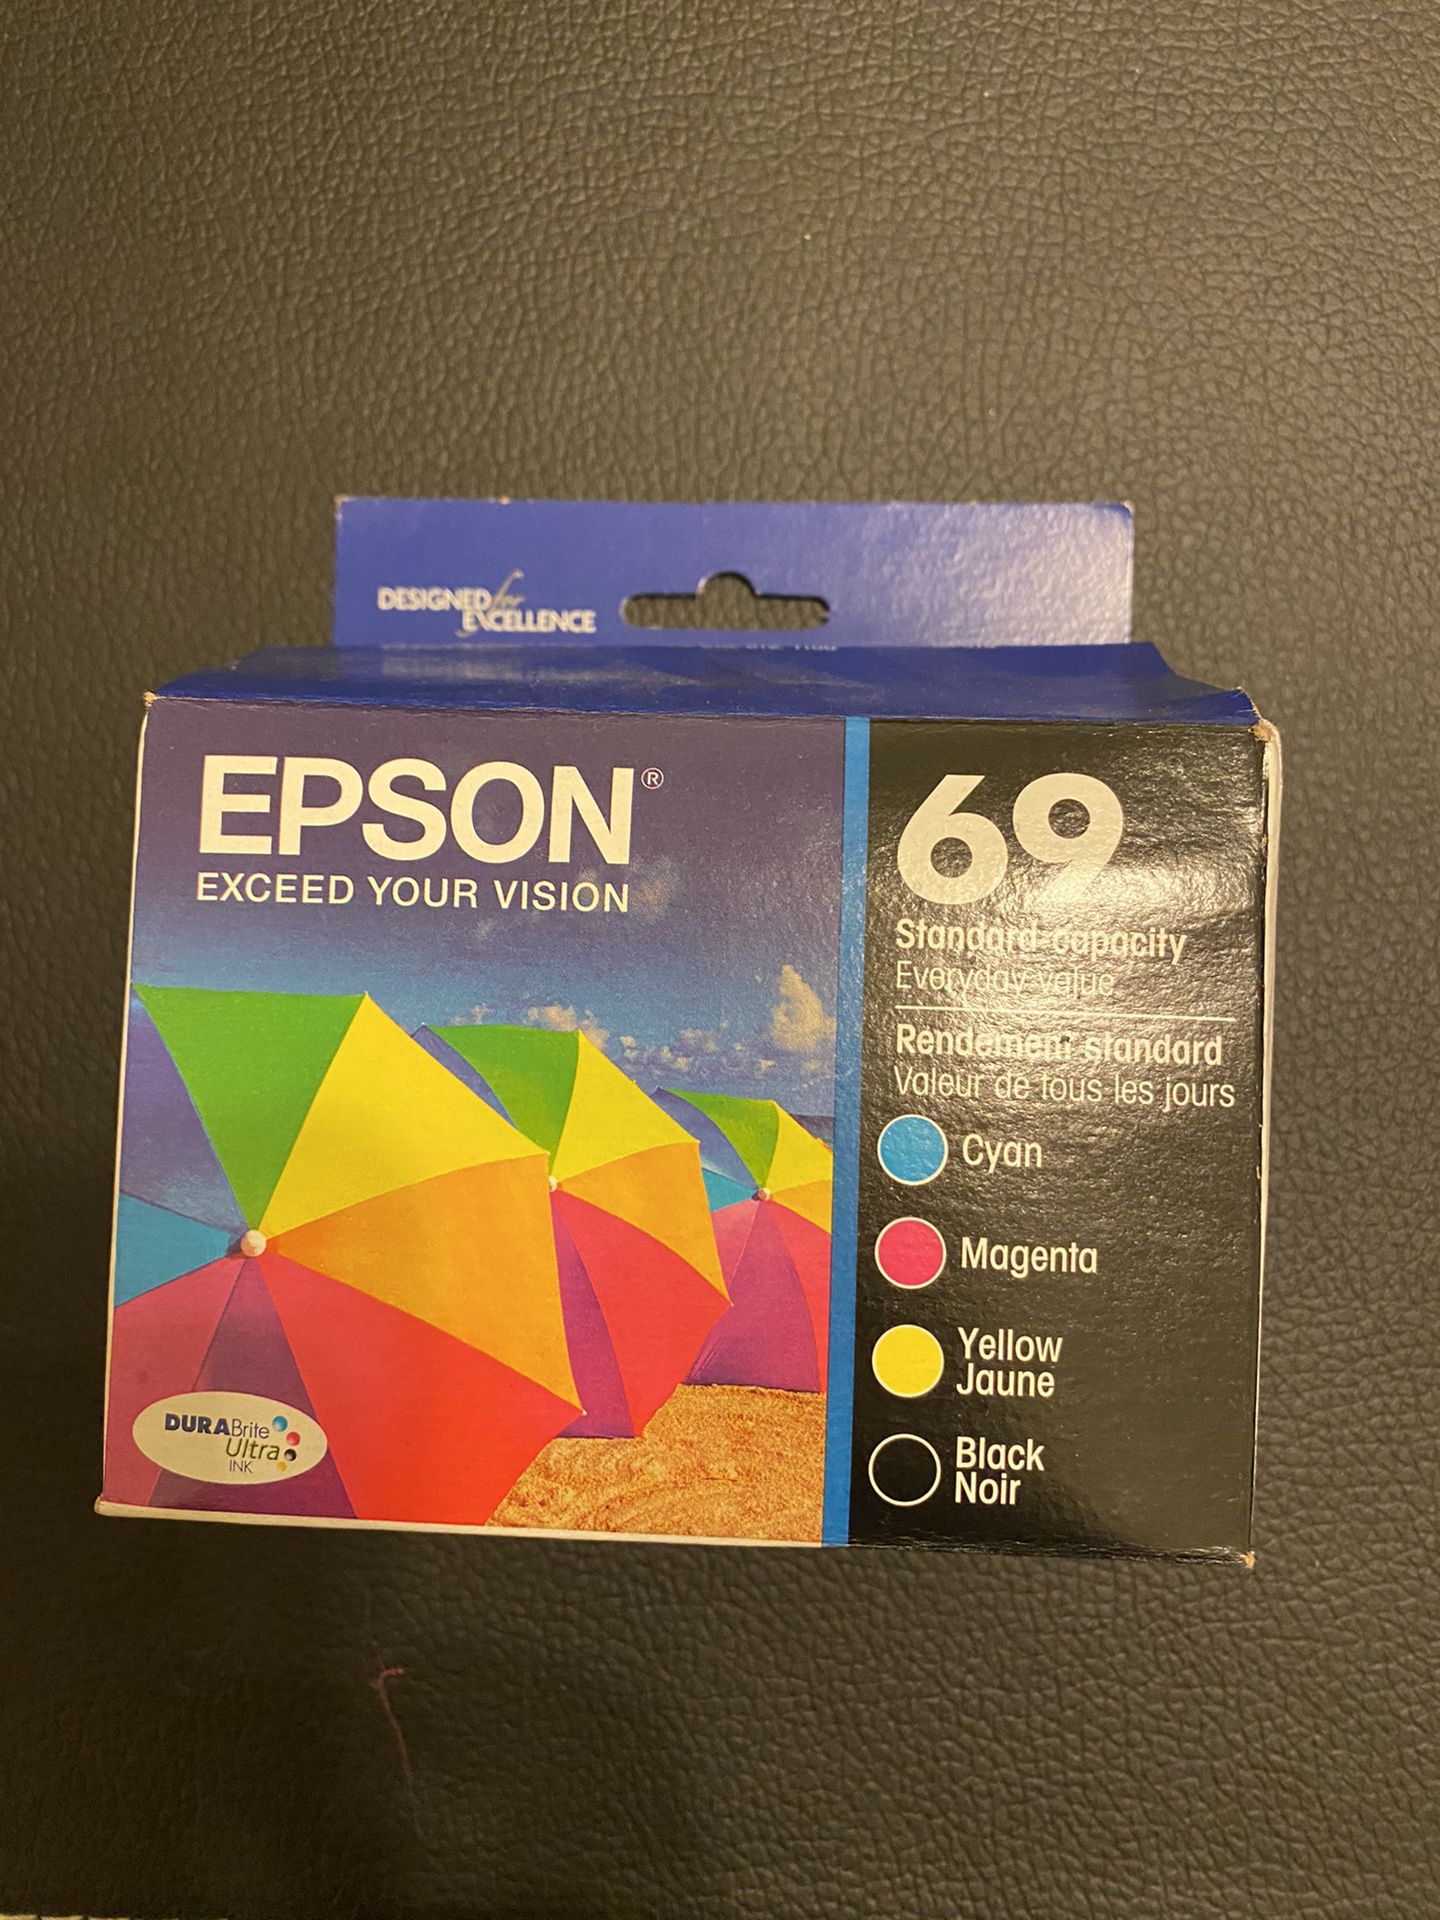 Epson printer ink 69. Never used or opened